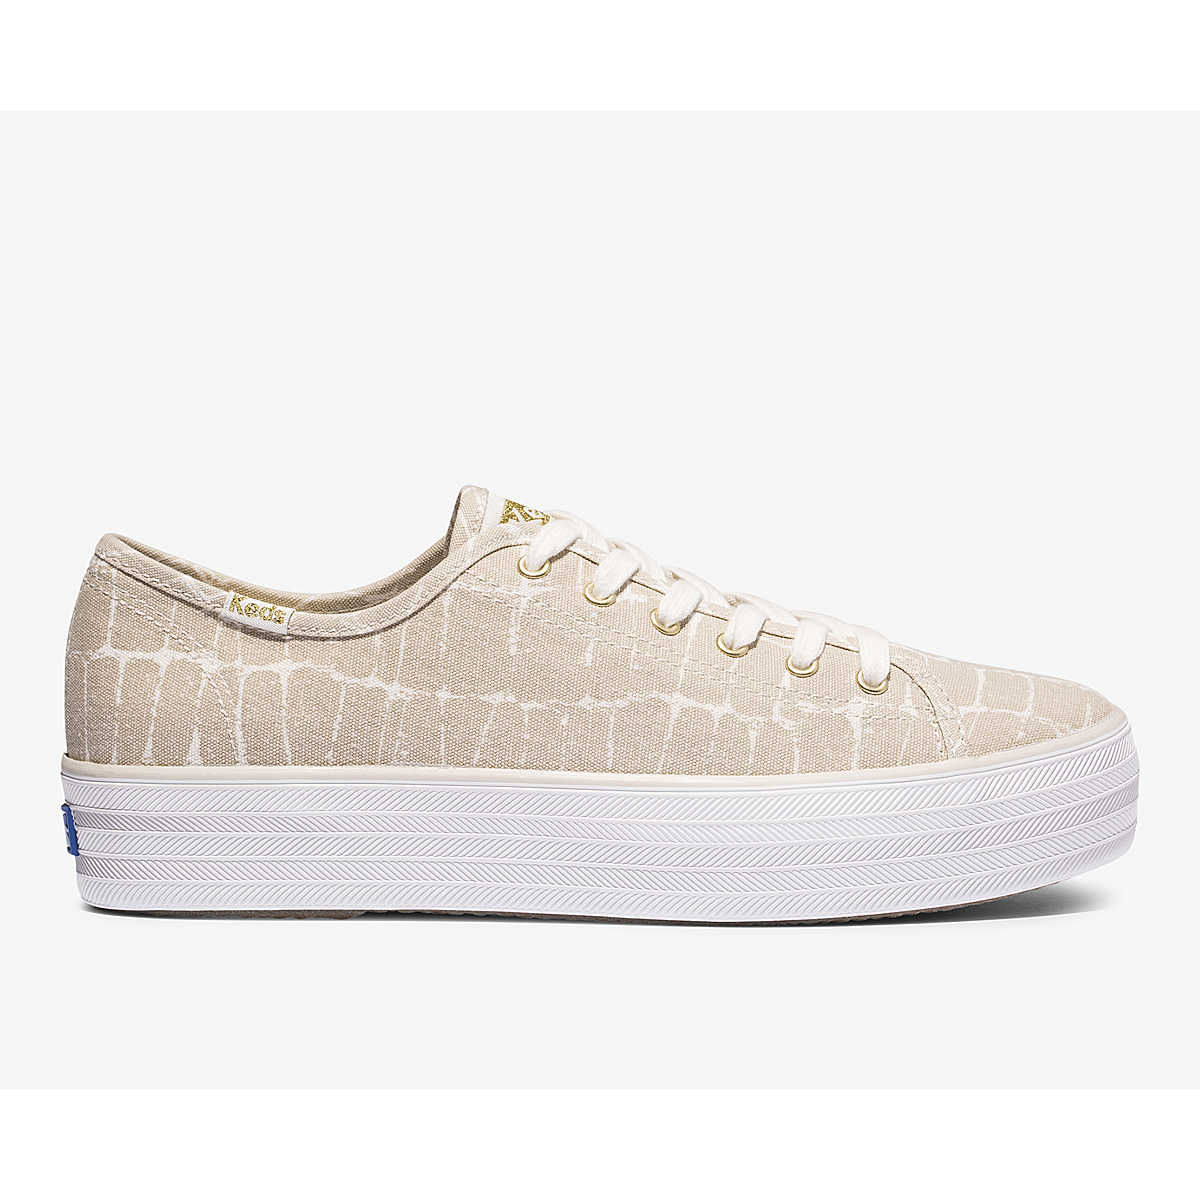 Keds Triple Kick Croc Feat. Organic Cotton In Taupe